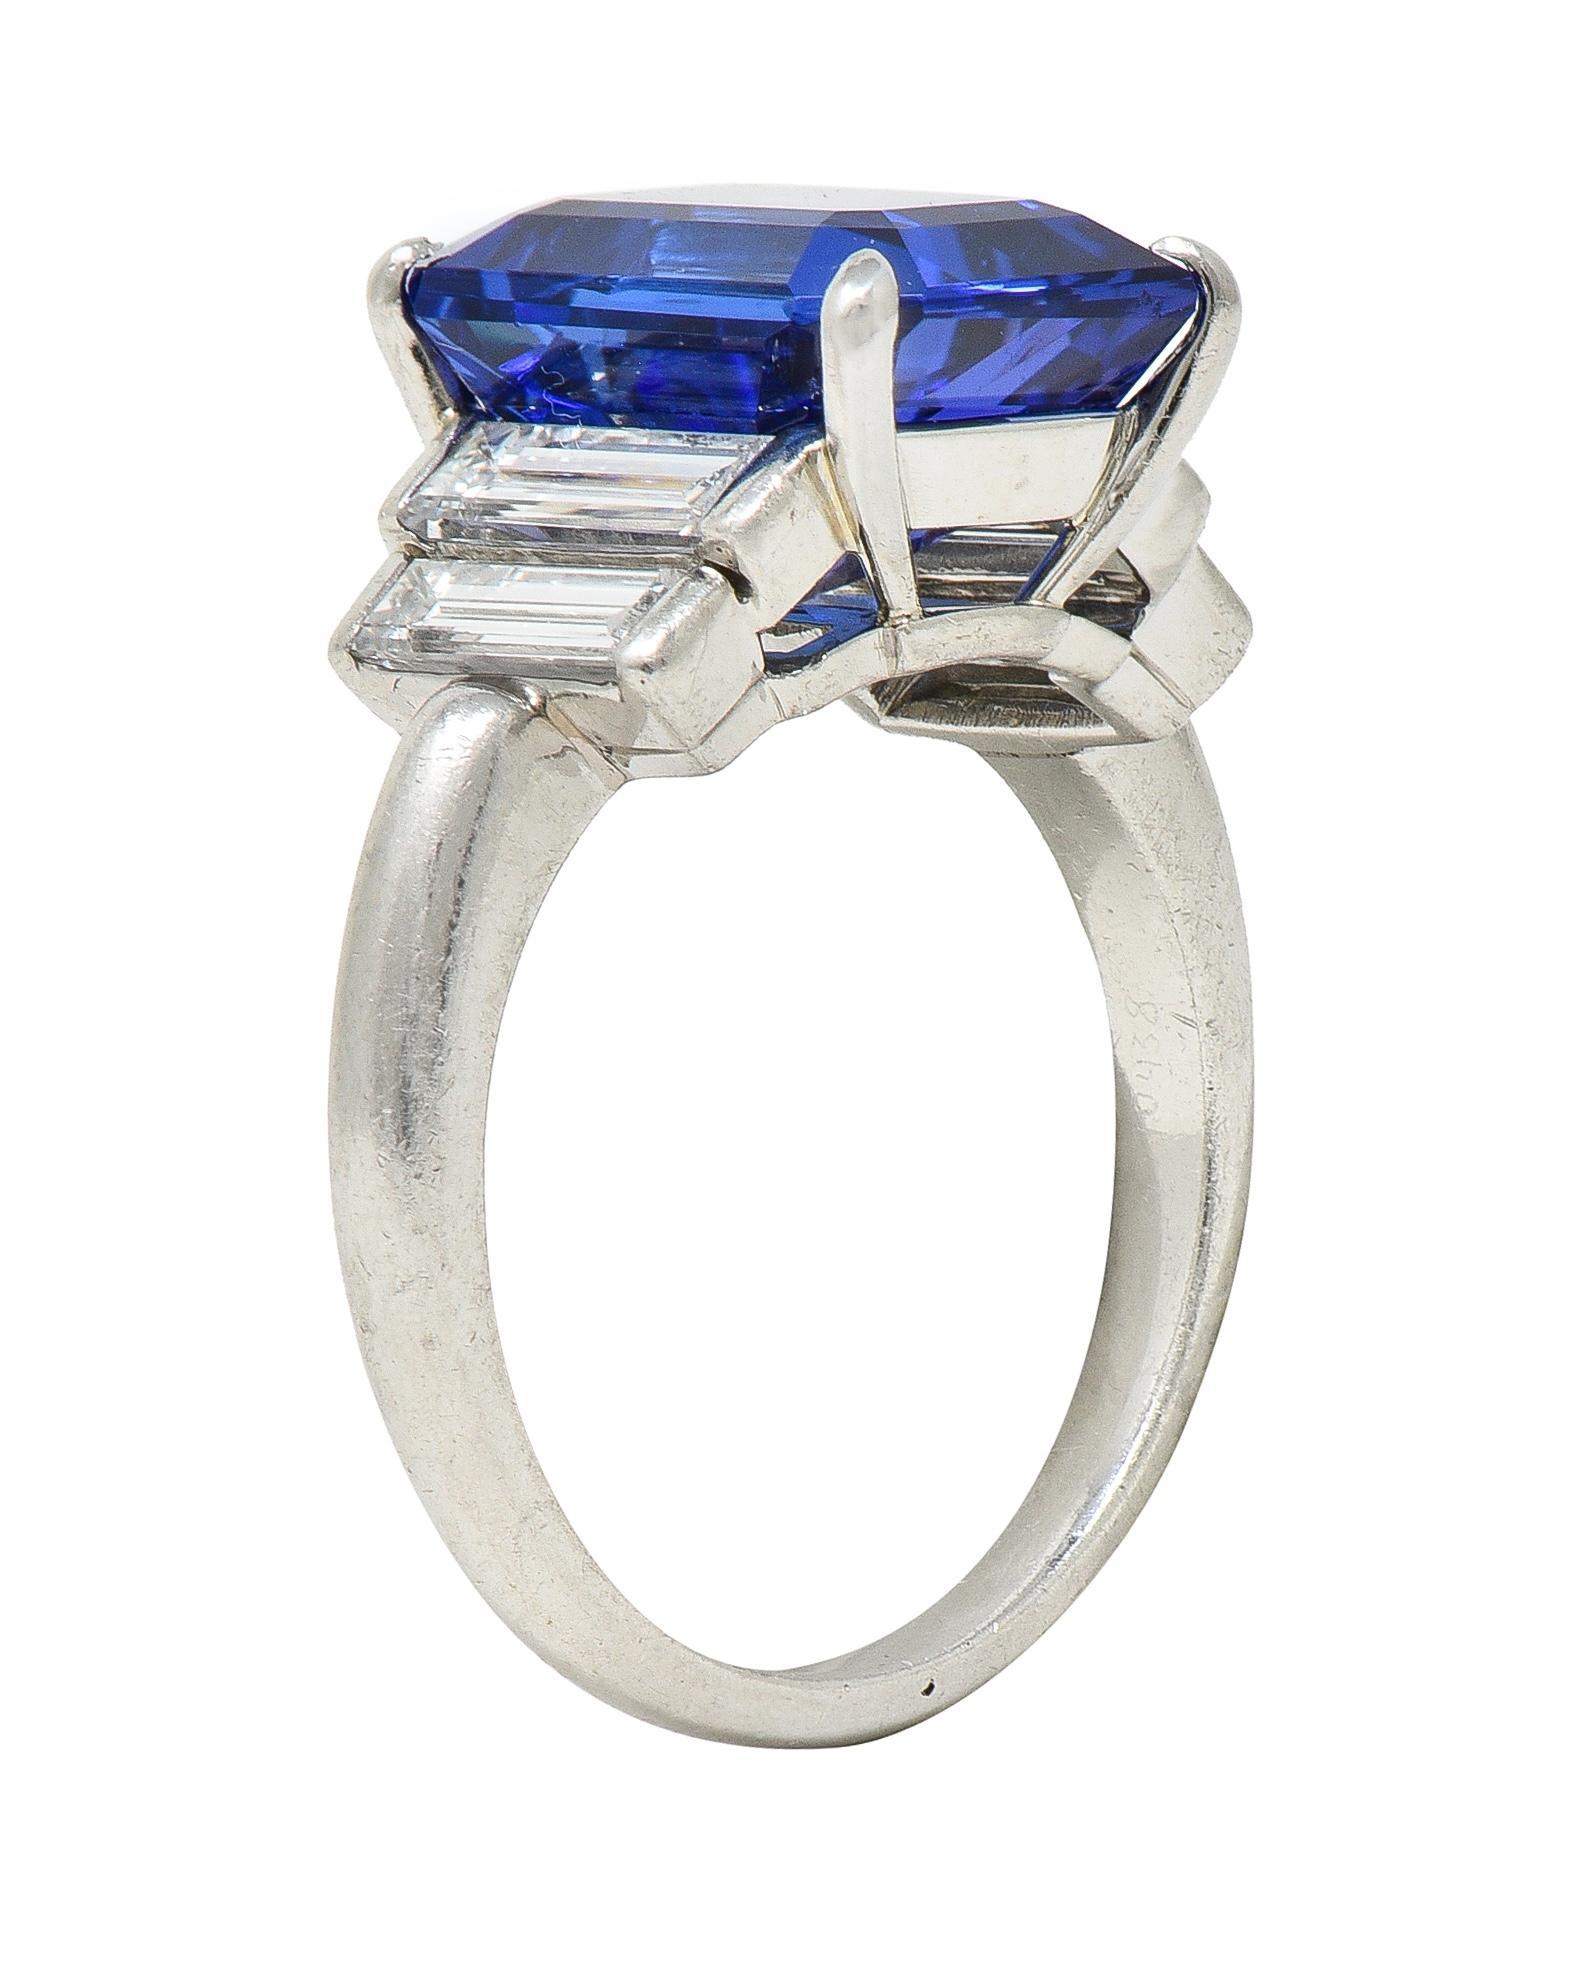 Tiffany & Co. 7.92 CTW Tanzanite Diamond Platinum Stepped Vintage Cocktail Ring For Sale 4